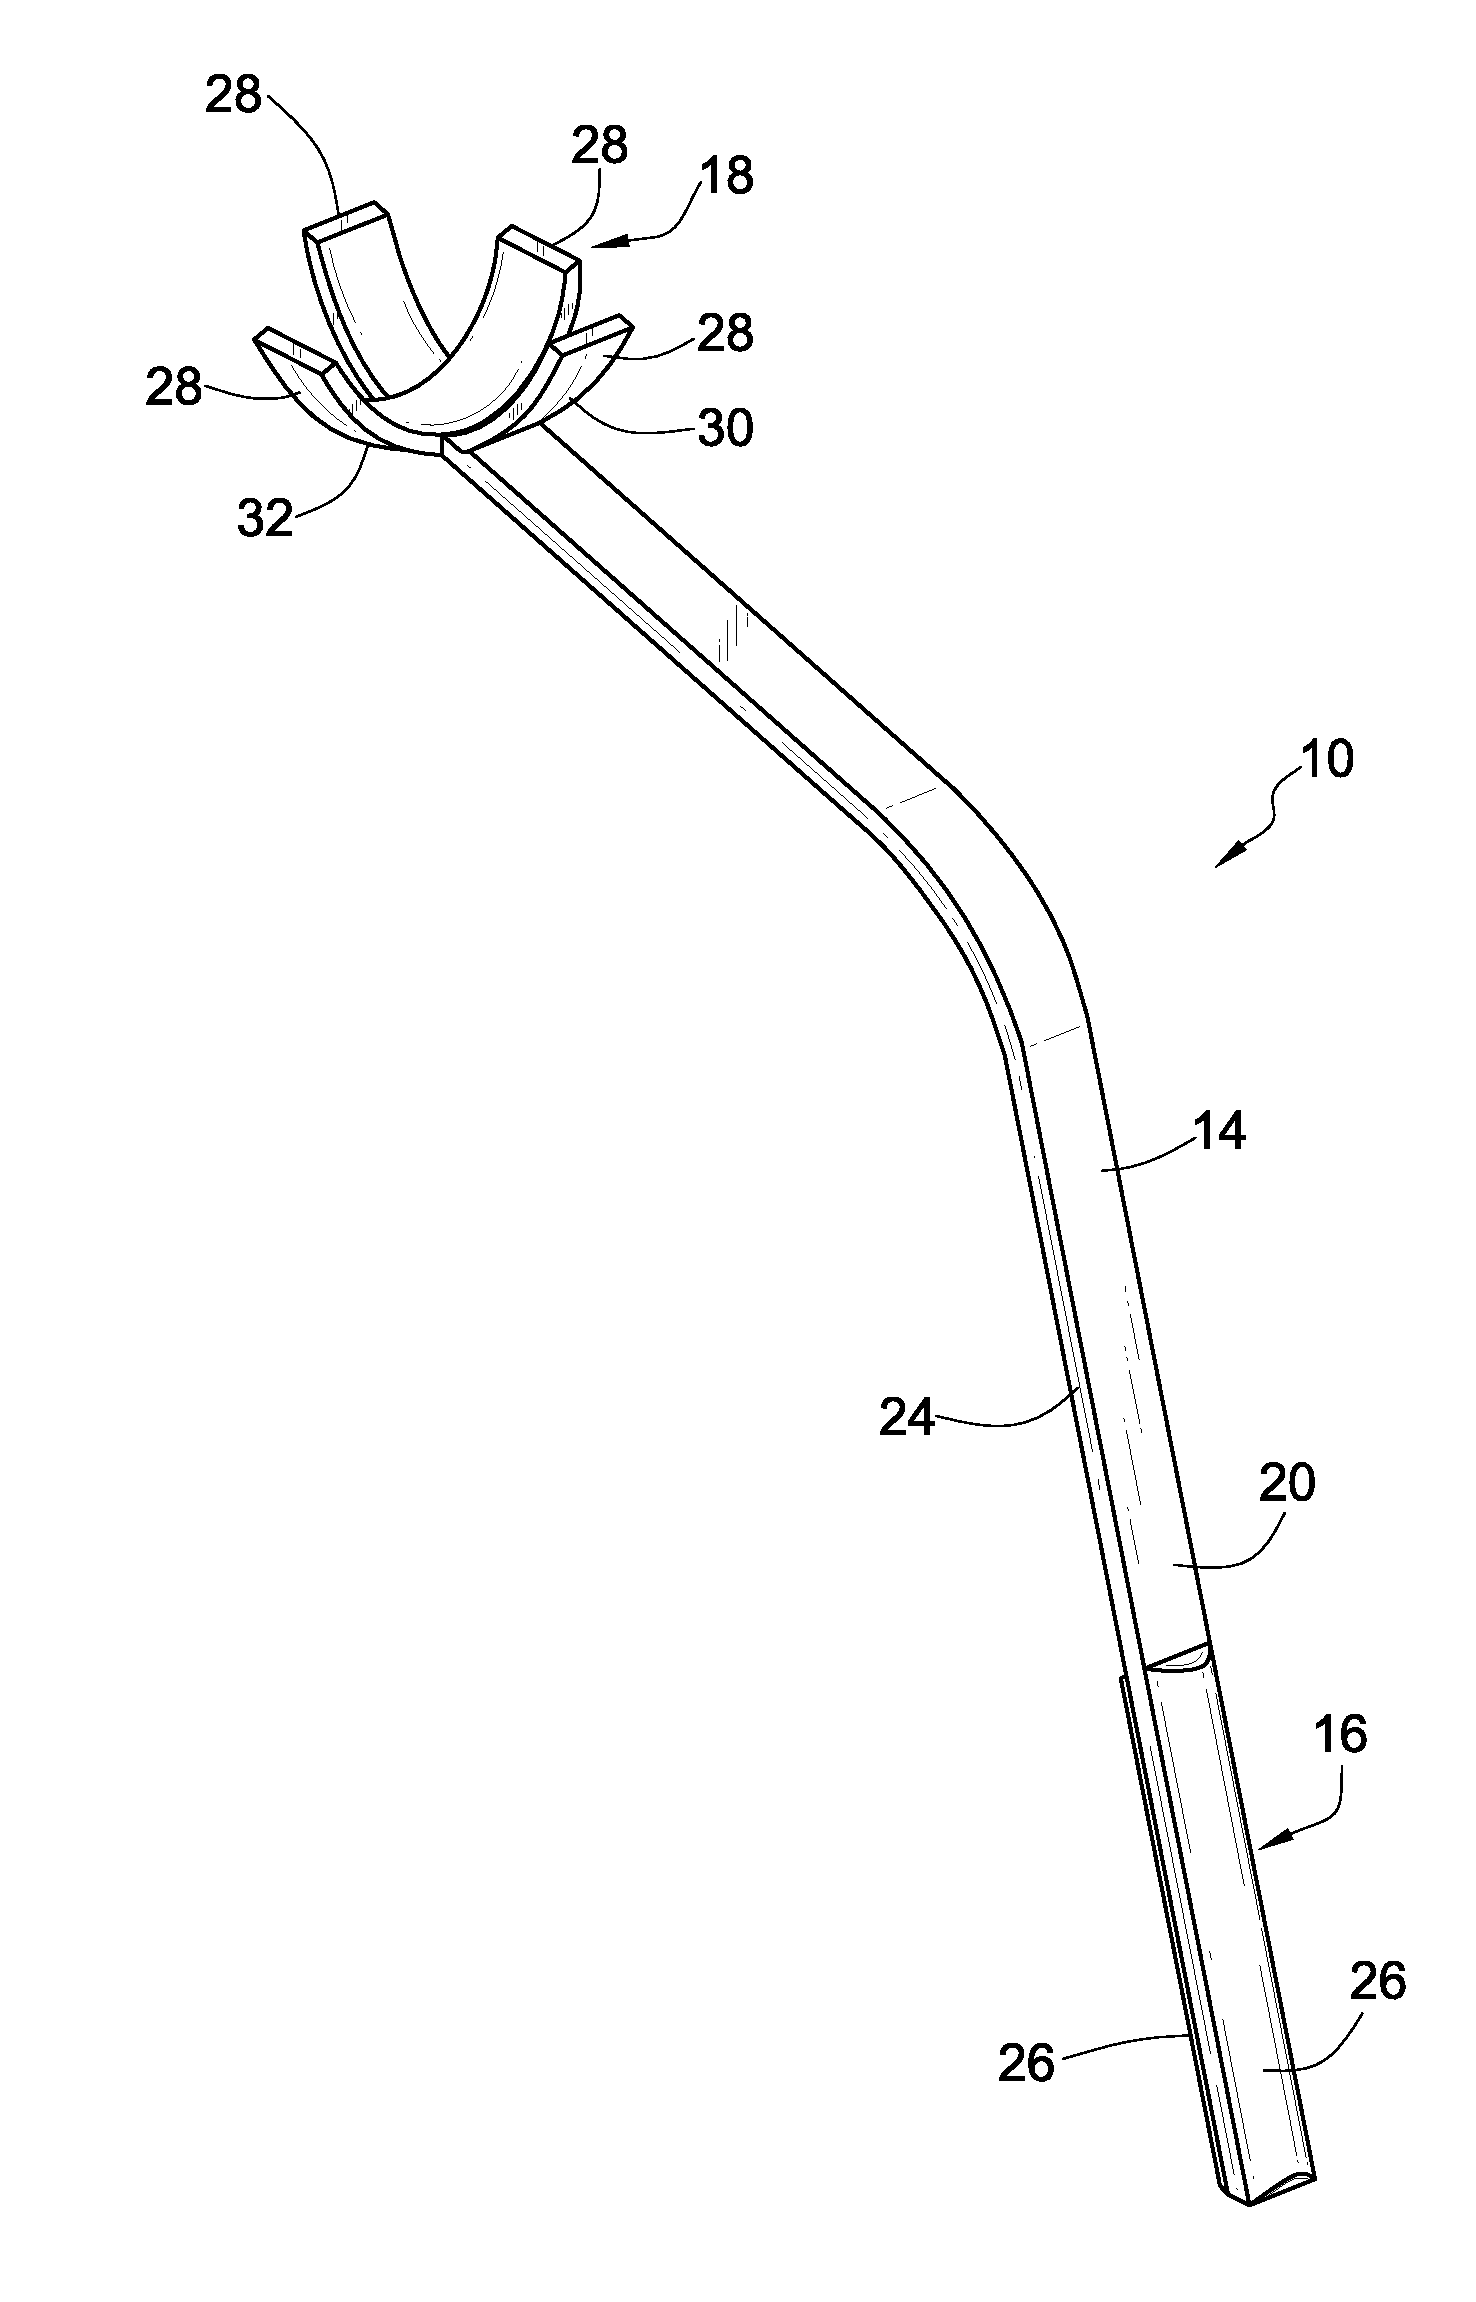 Ball throwing device and display package therefor